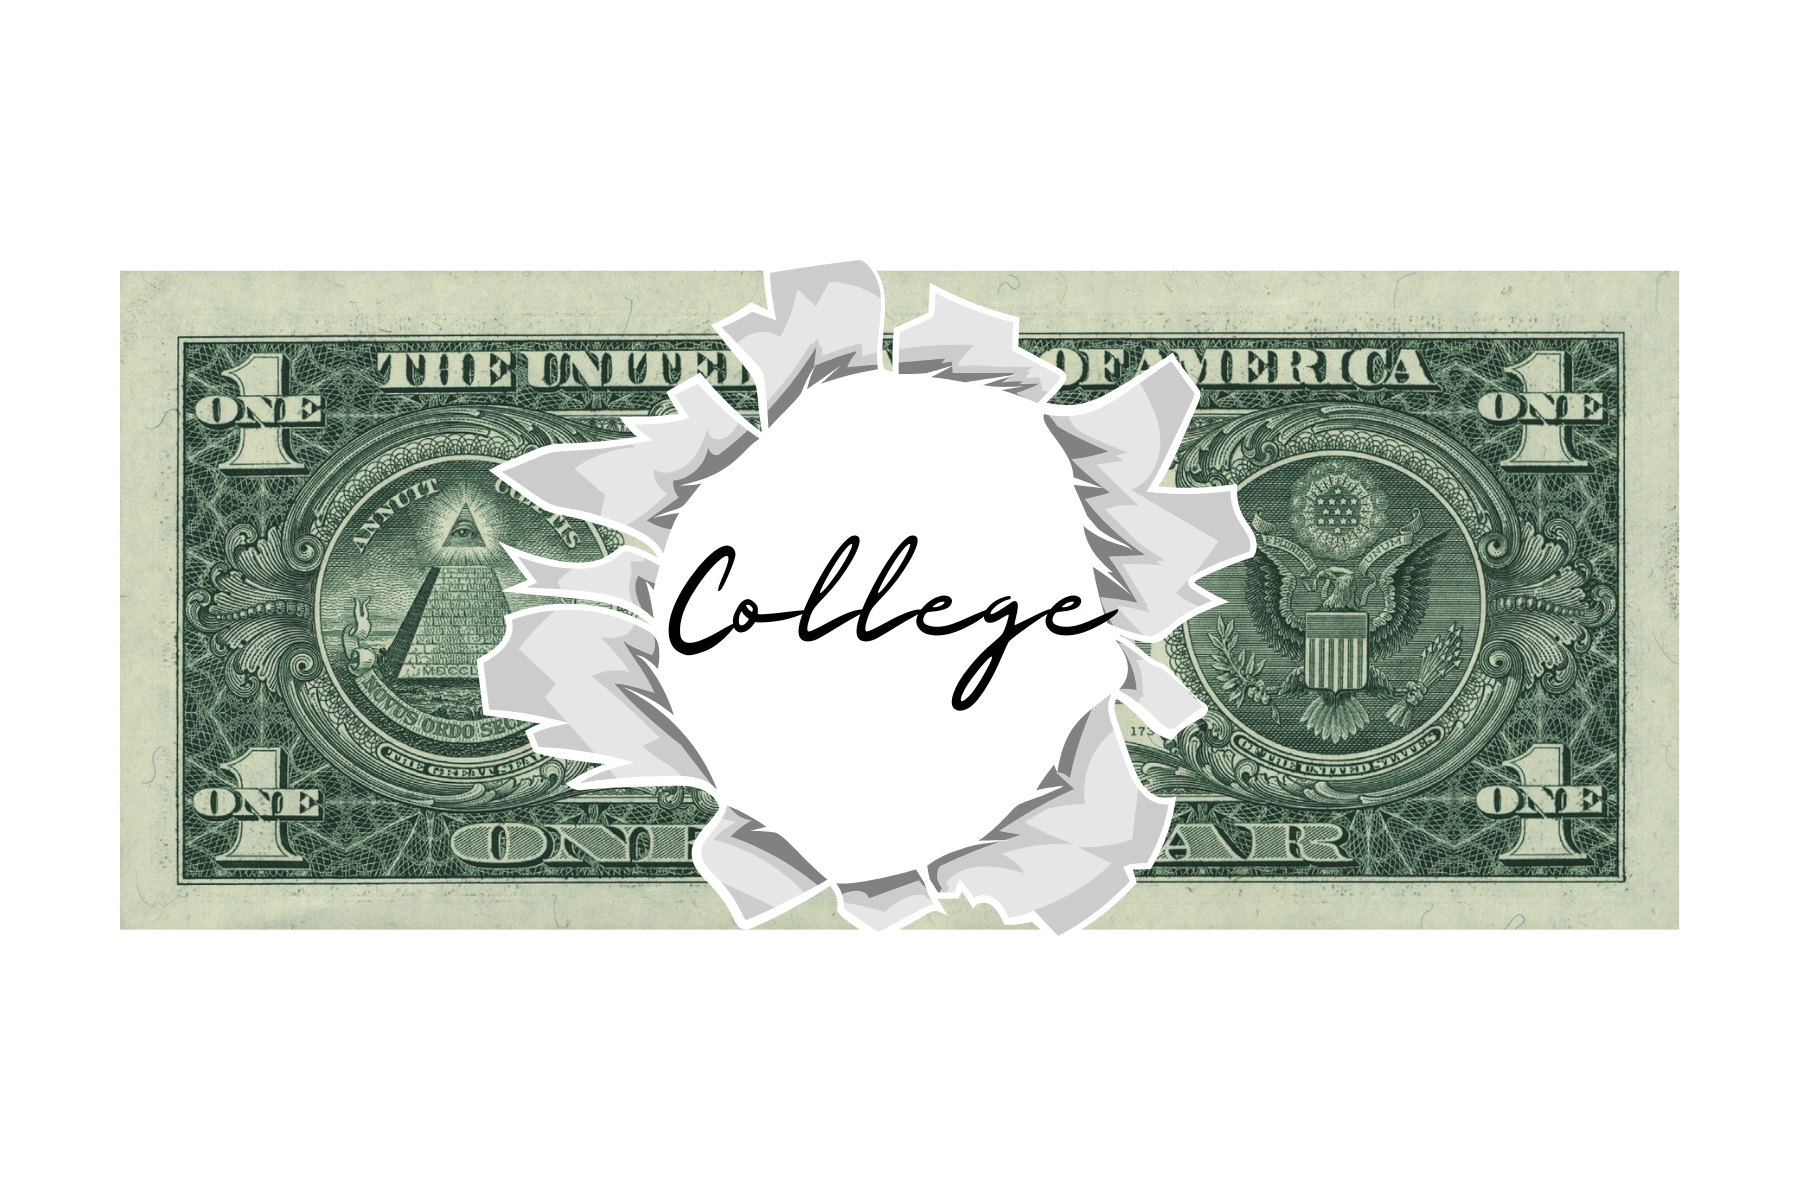 picture of the American dollar with the middle busted out and it says college in the hole.